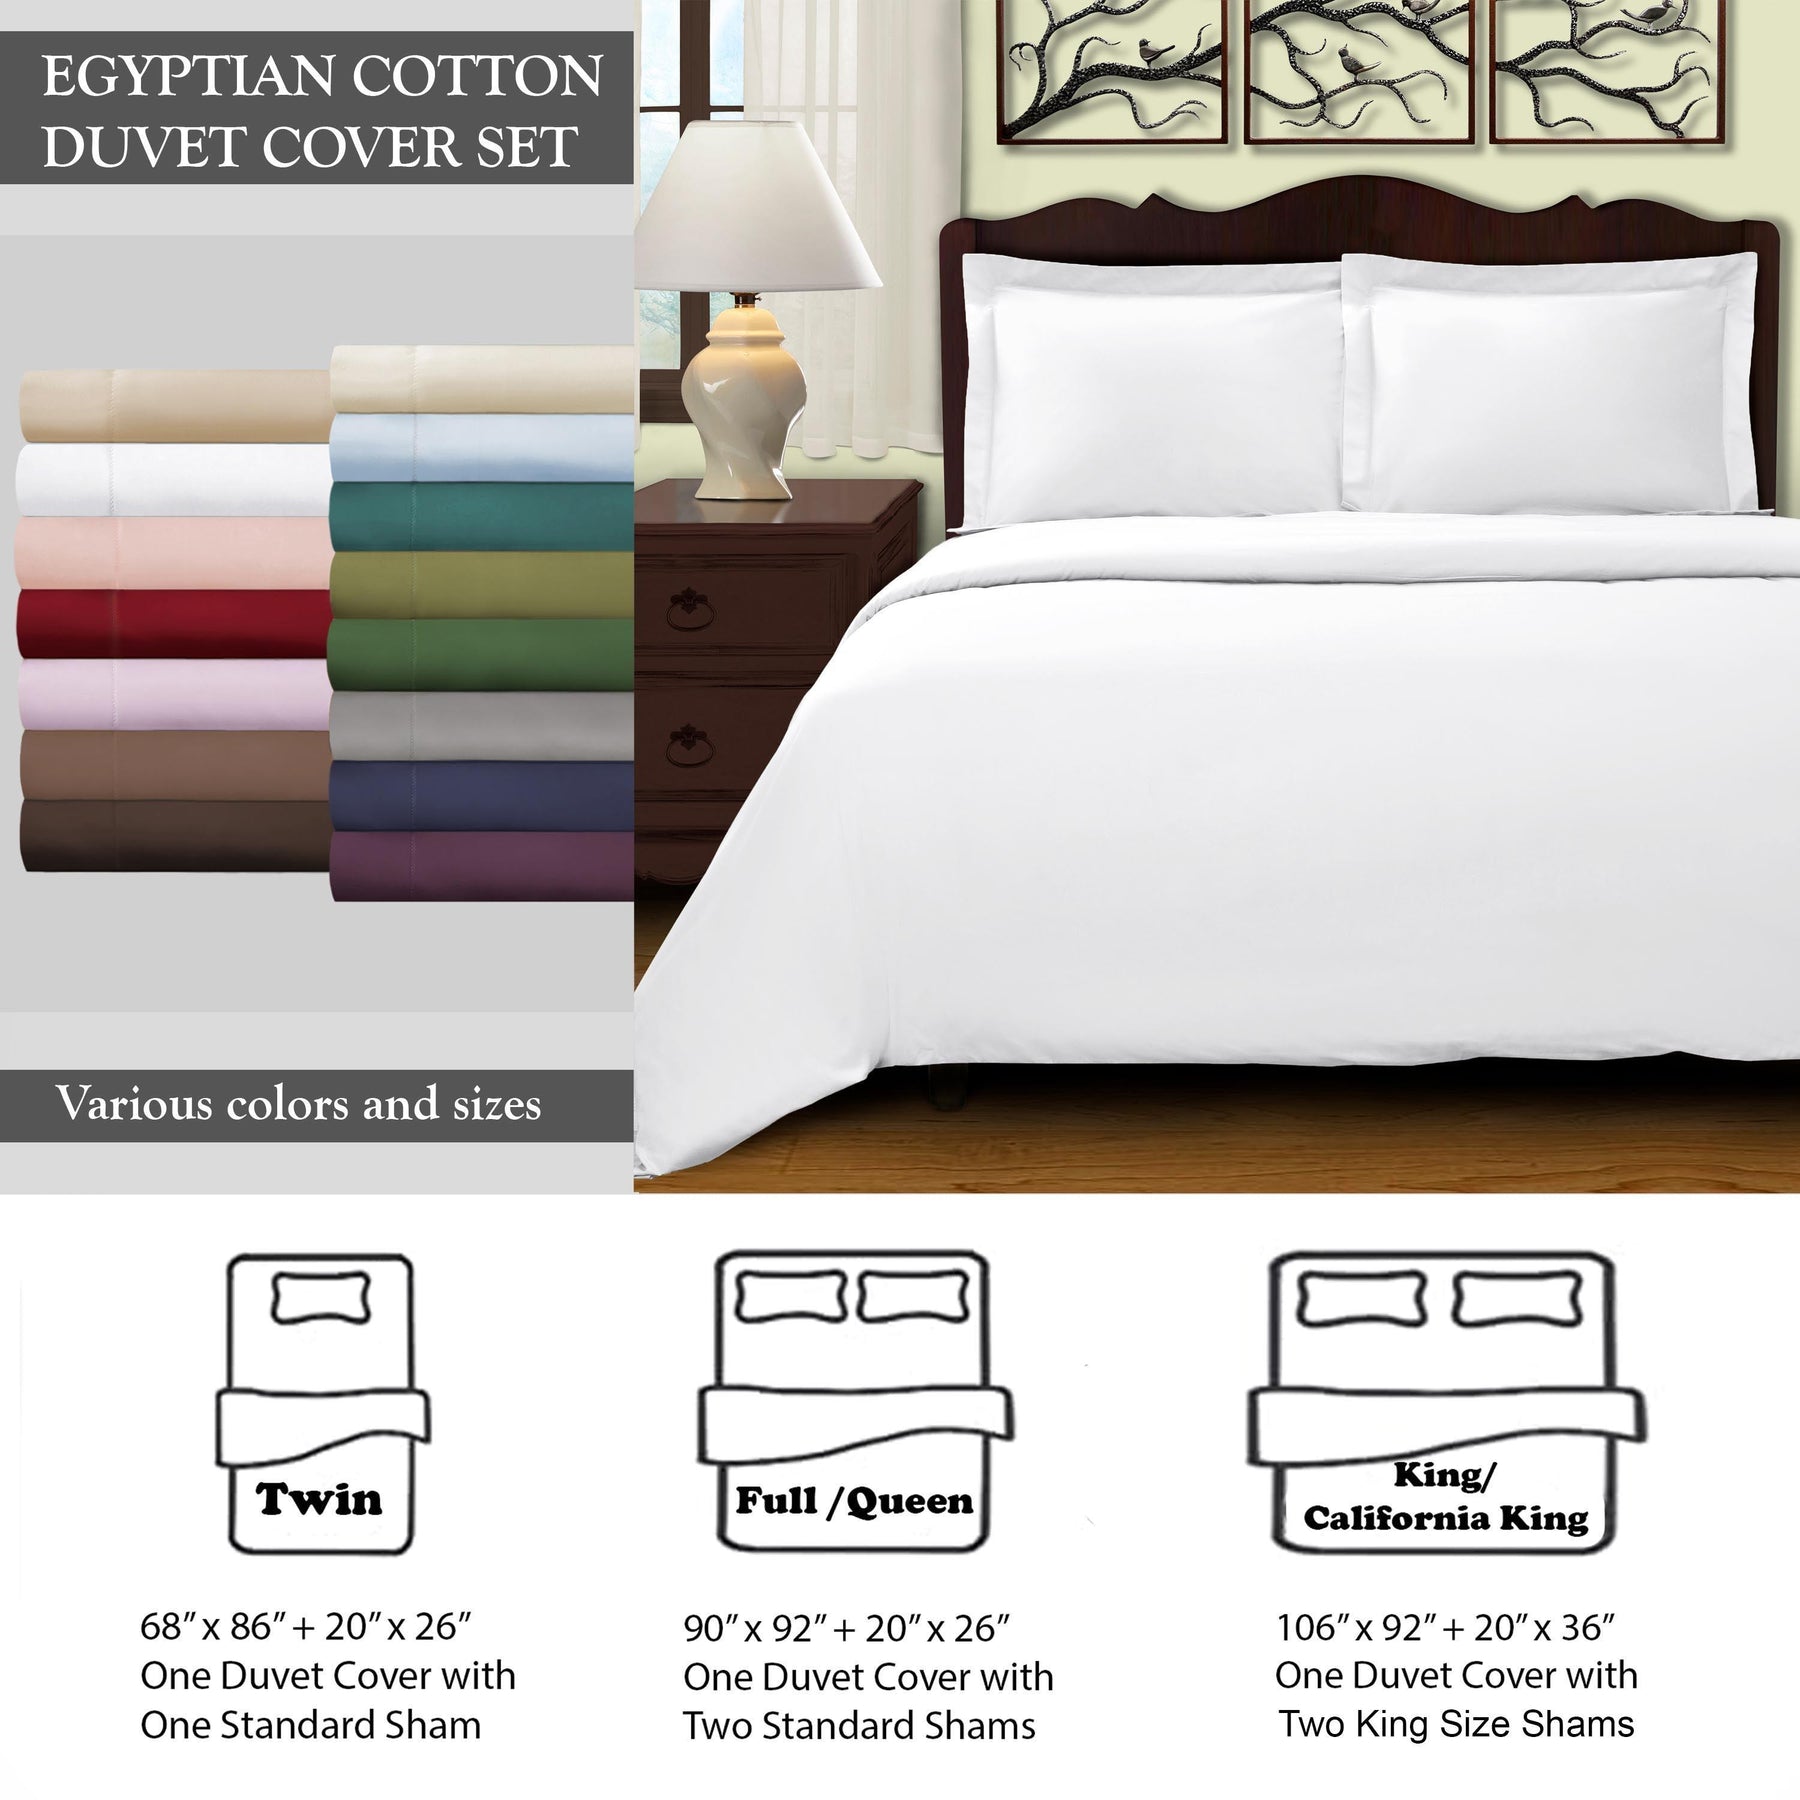  Superior Egyptian Cotton 400 Thread Count Solid Duvet Cover Set - White